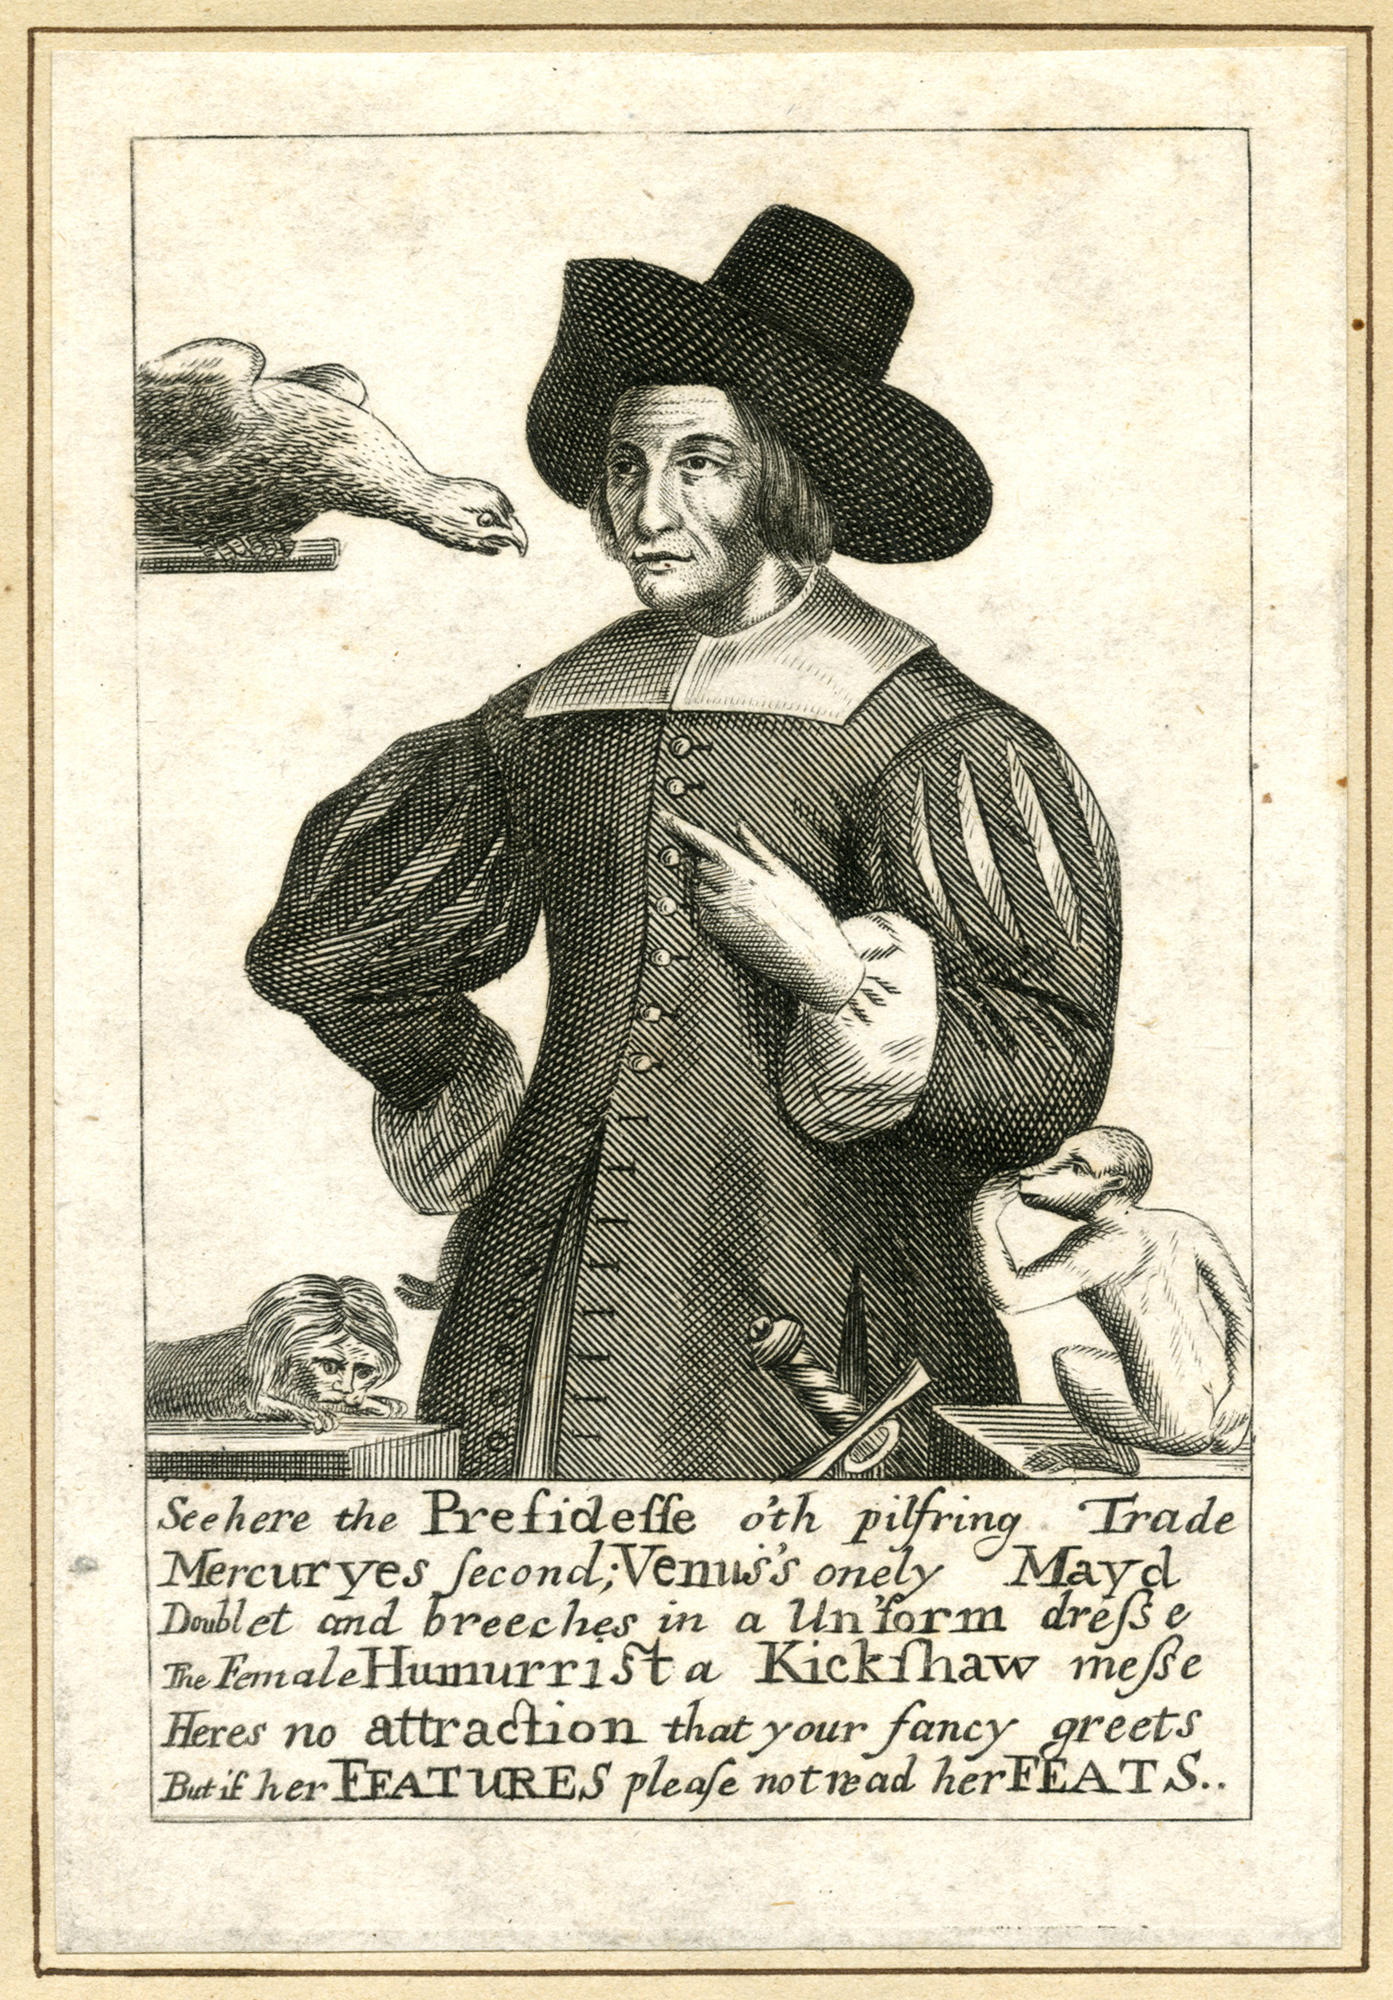 Engraving of Mary Frith three quarter length view in masculine clothing